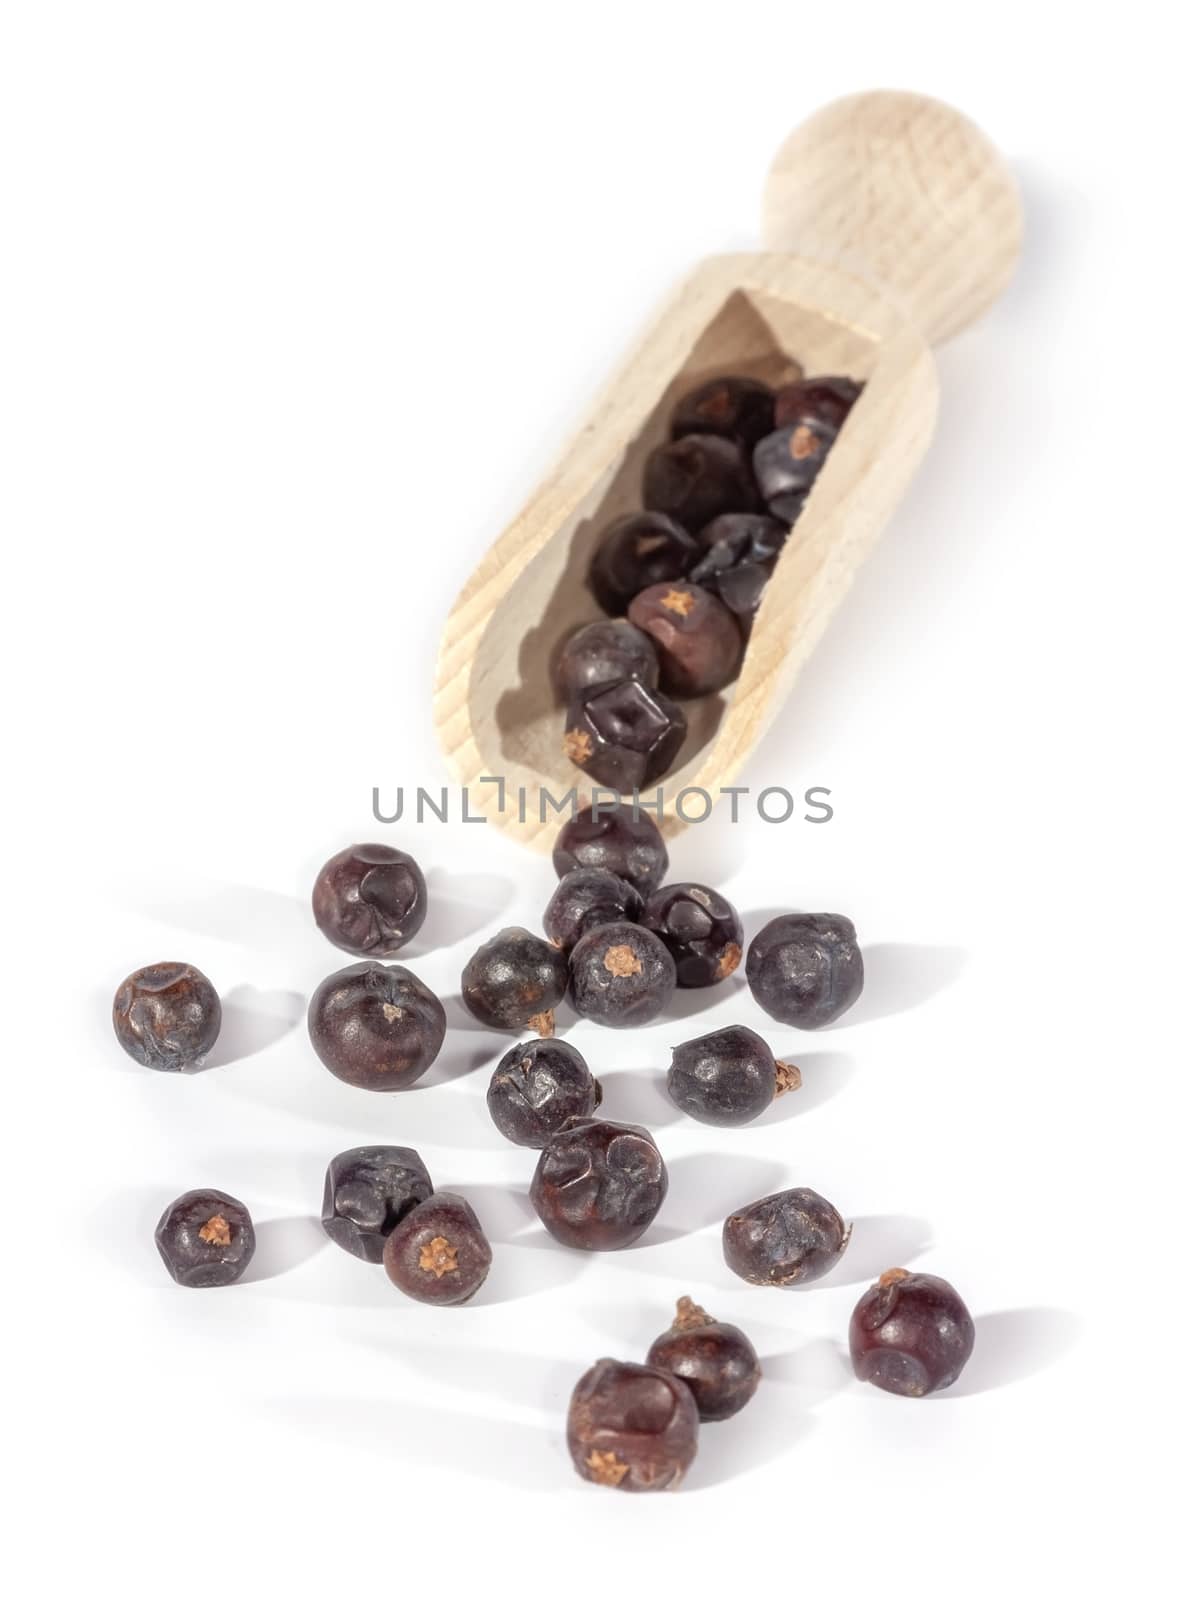 Dried juniper berries isolated on white. Soft focus view. Close up.